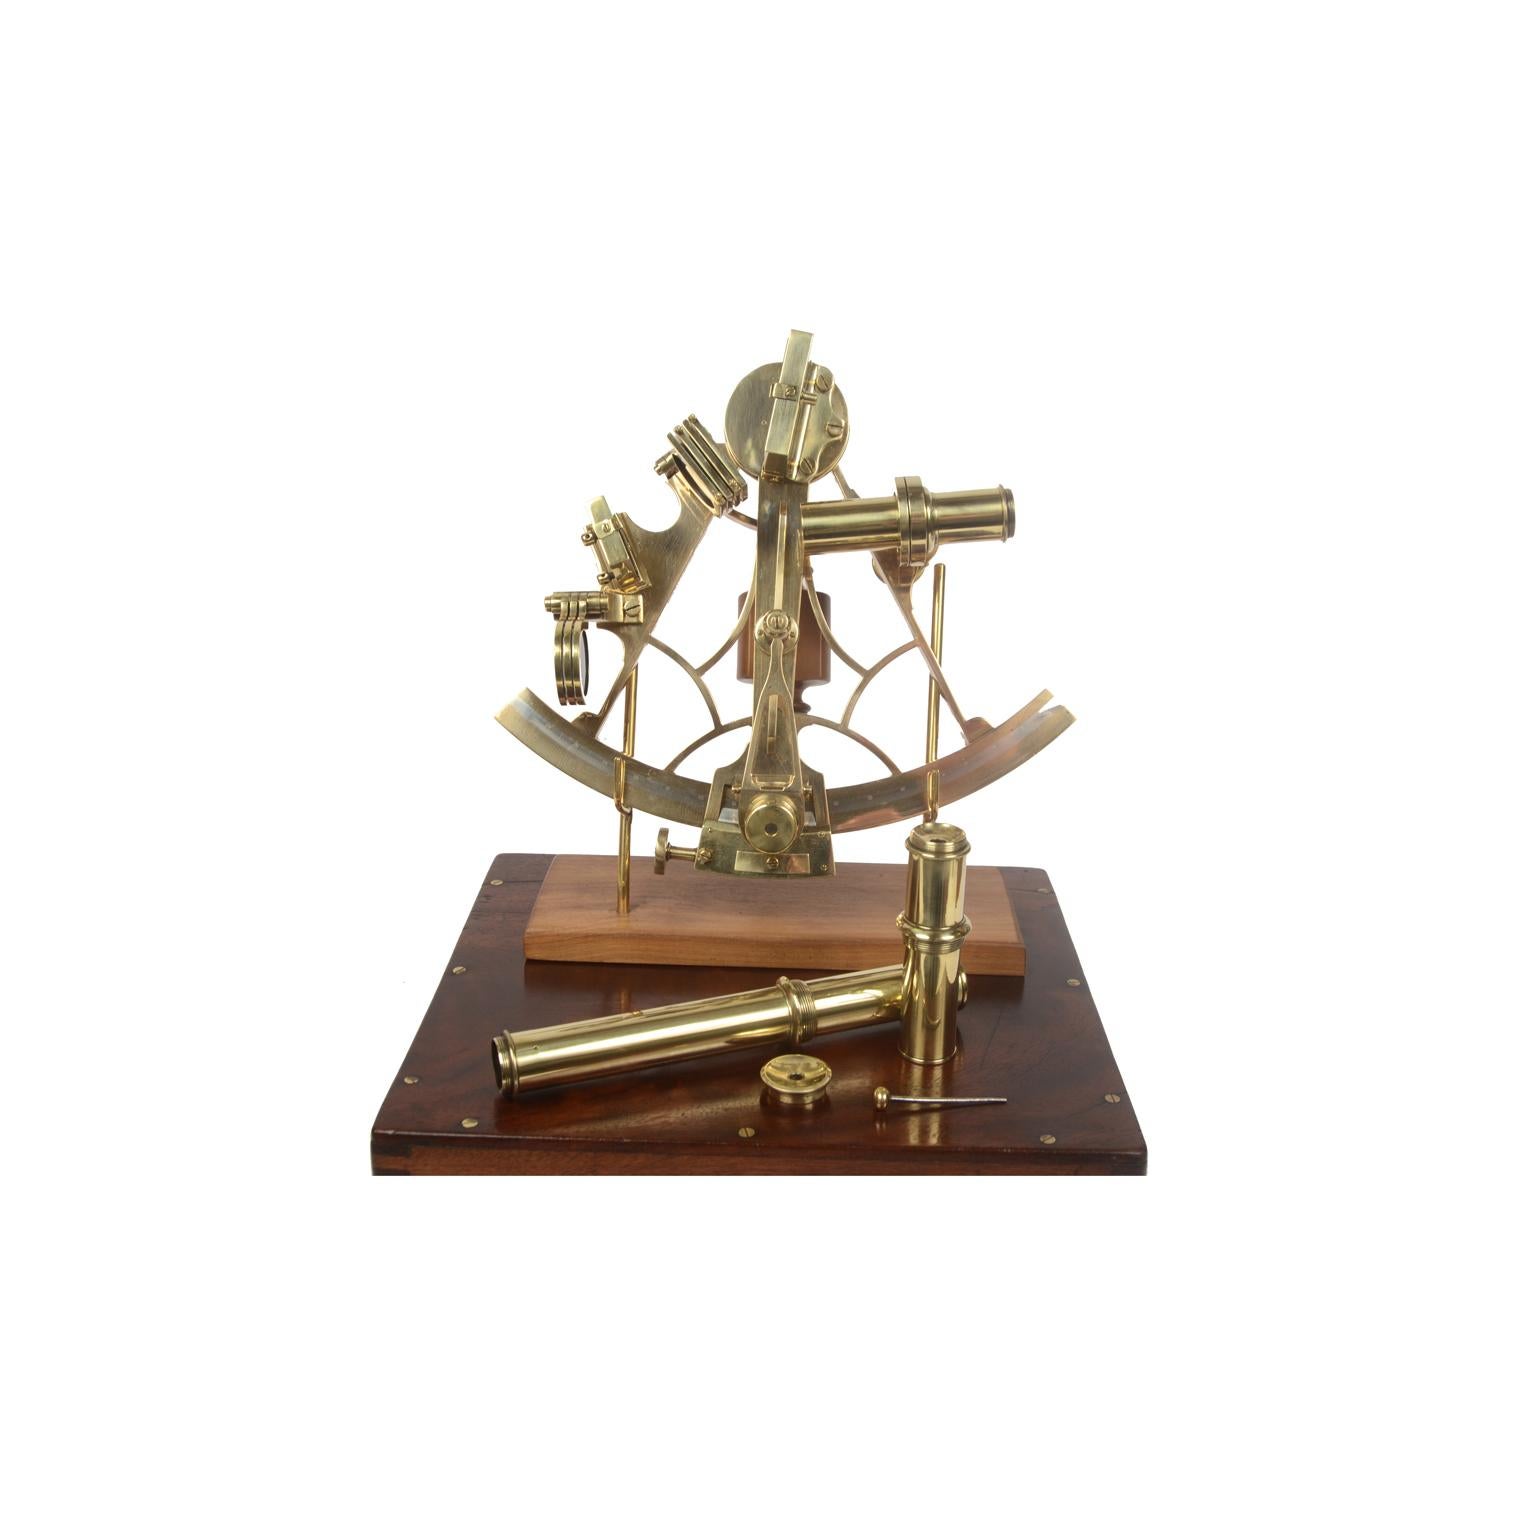 Brass sextant made in the mid-19th century, complete with lenses and placed in its beautiful original mahogany box complete with key and brass handle and hinges. Vernier of engraved silver, boxwood handle, 3 colored glasses for the fixed mirror and